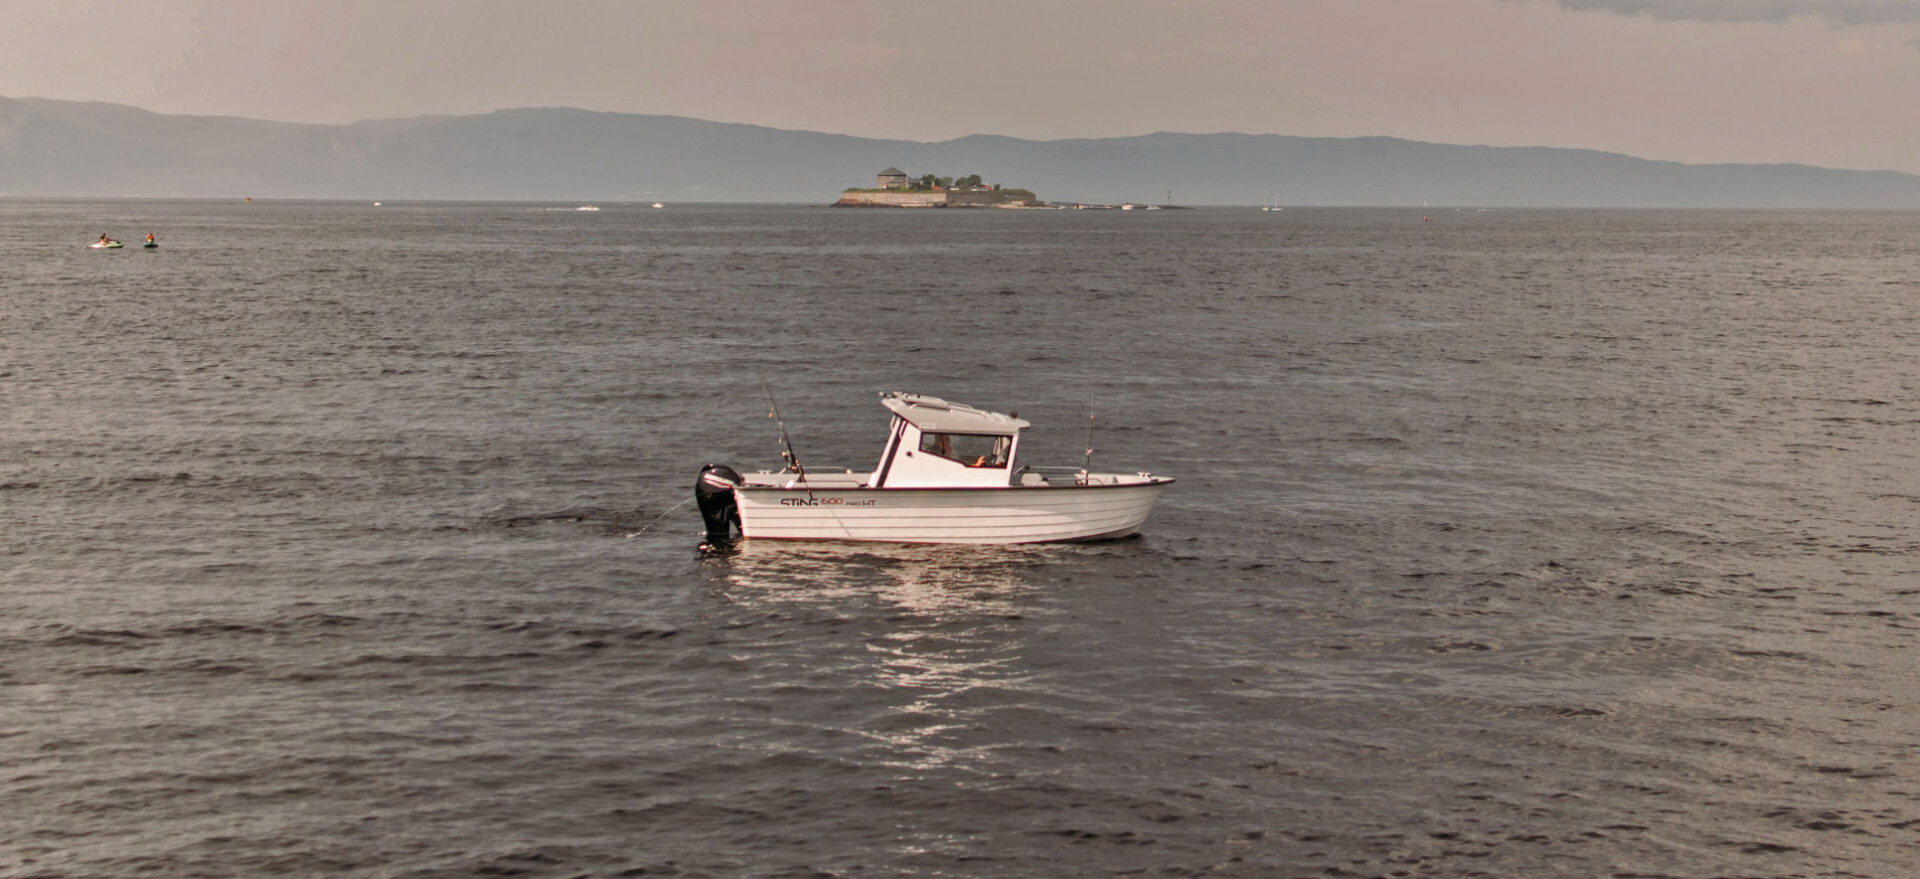 Featured image for “Trondheim Fishing”